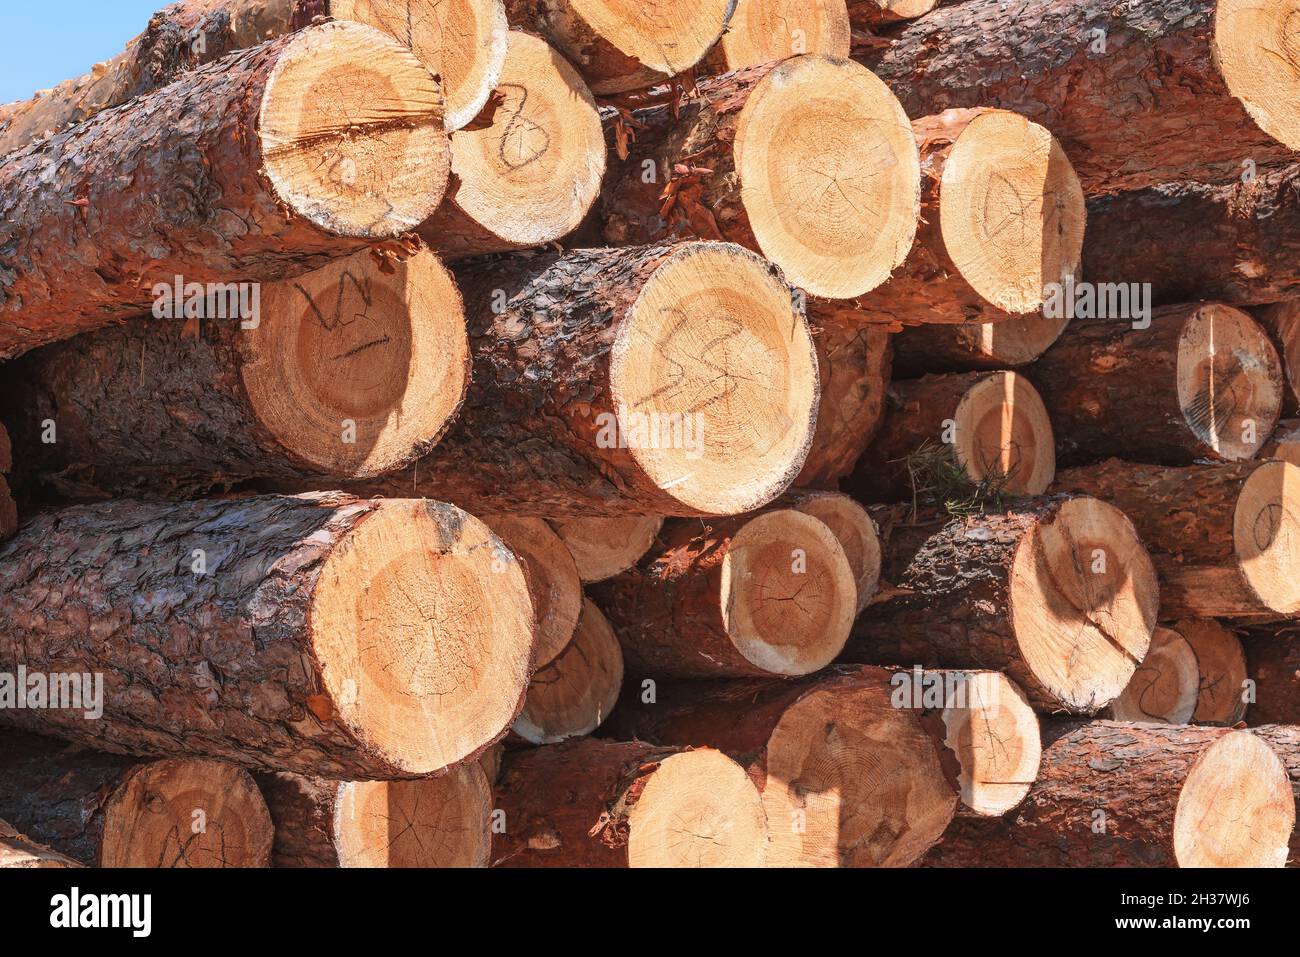 Pine logs from which boards and other lumber will be made. Stock Photo